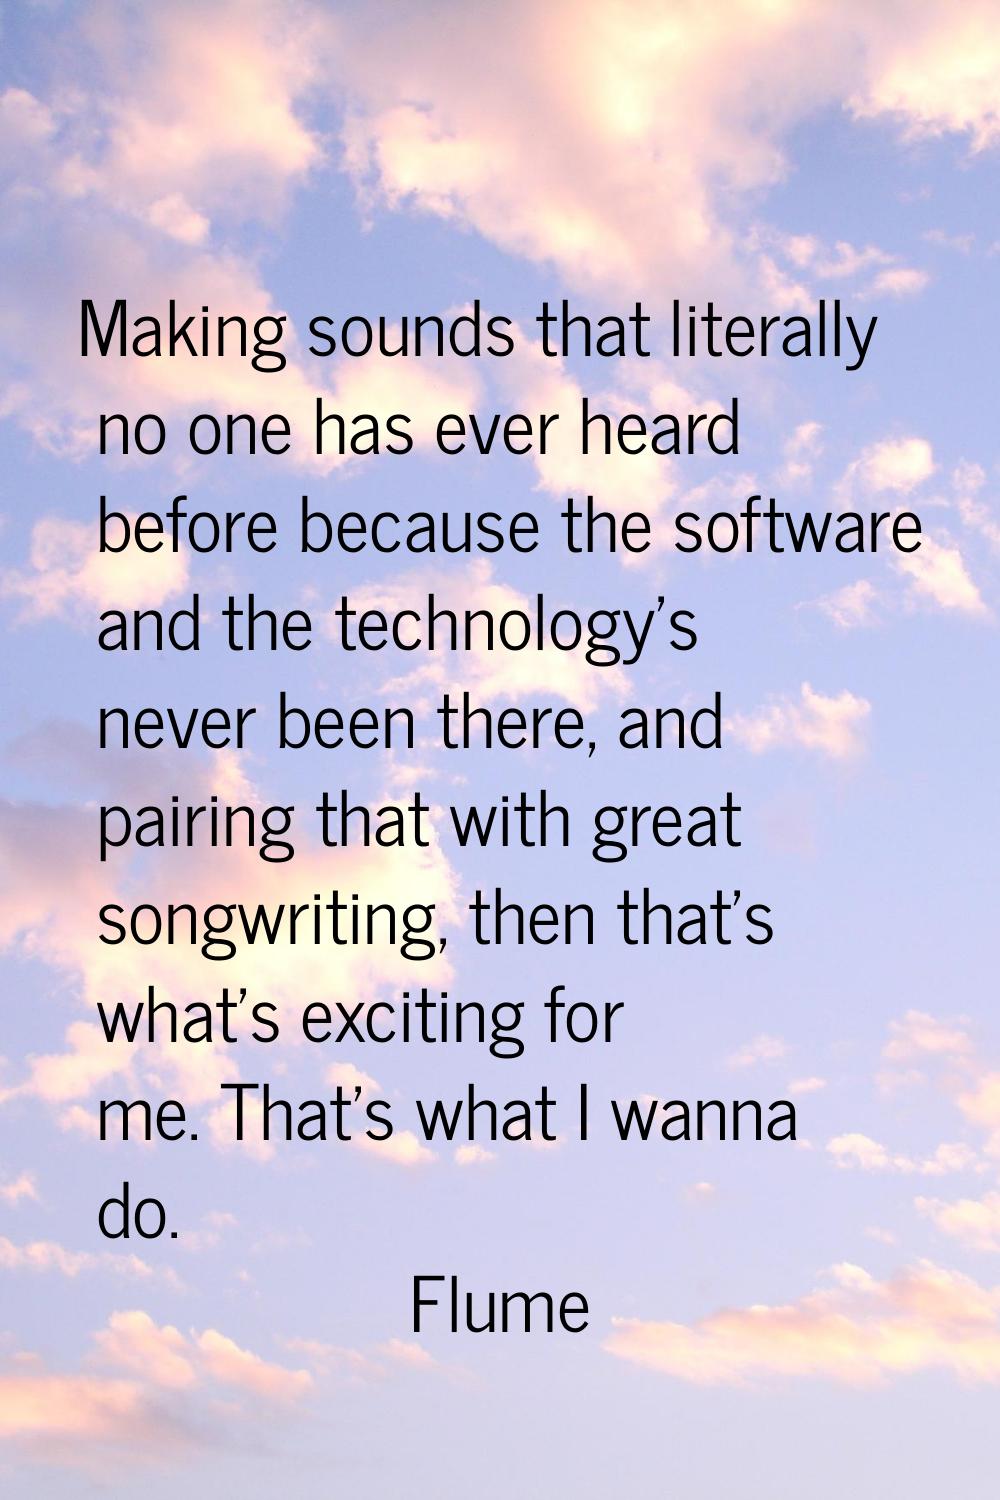 Making sounds that literally no one has ever heard before because the software and the technology's